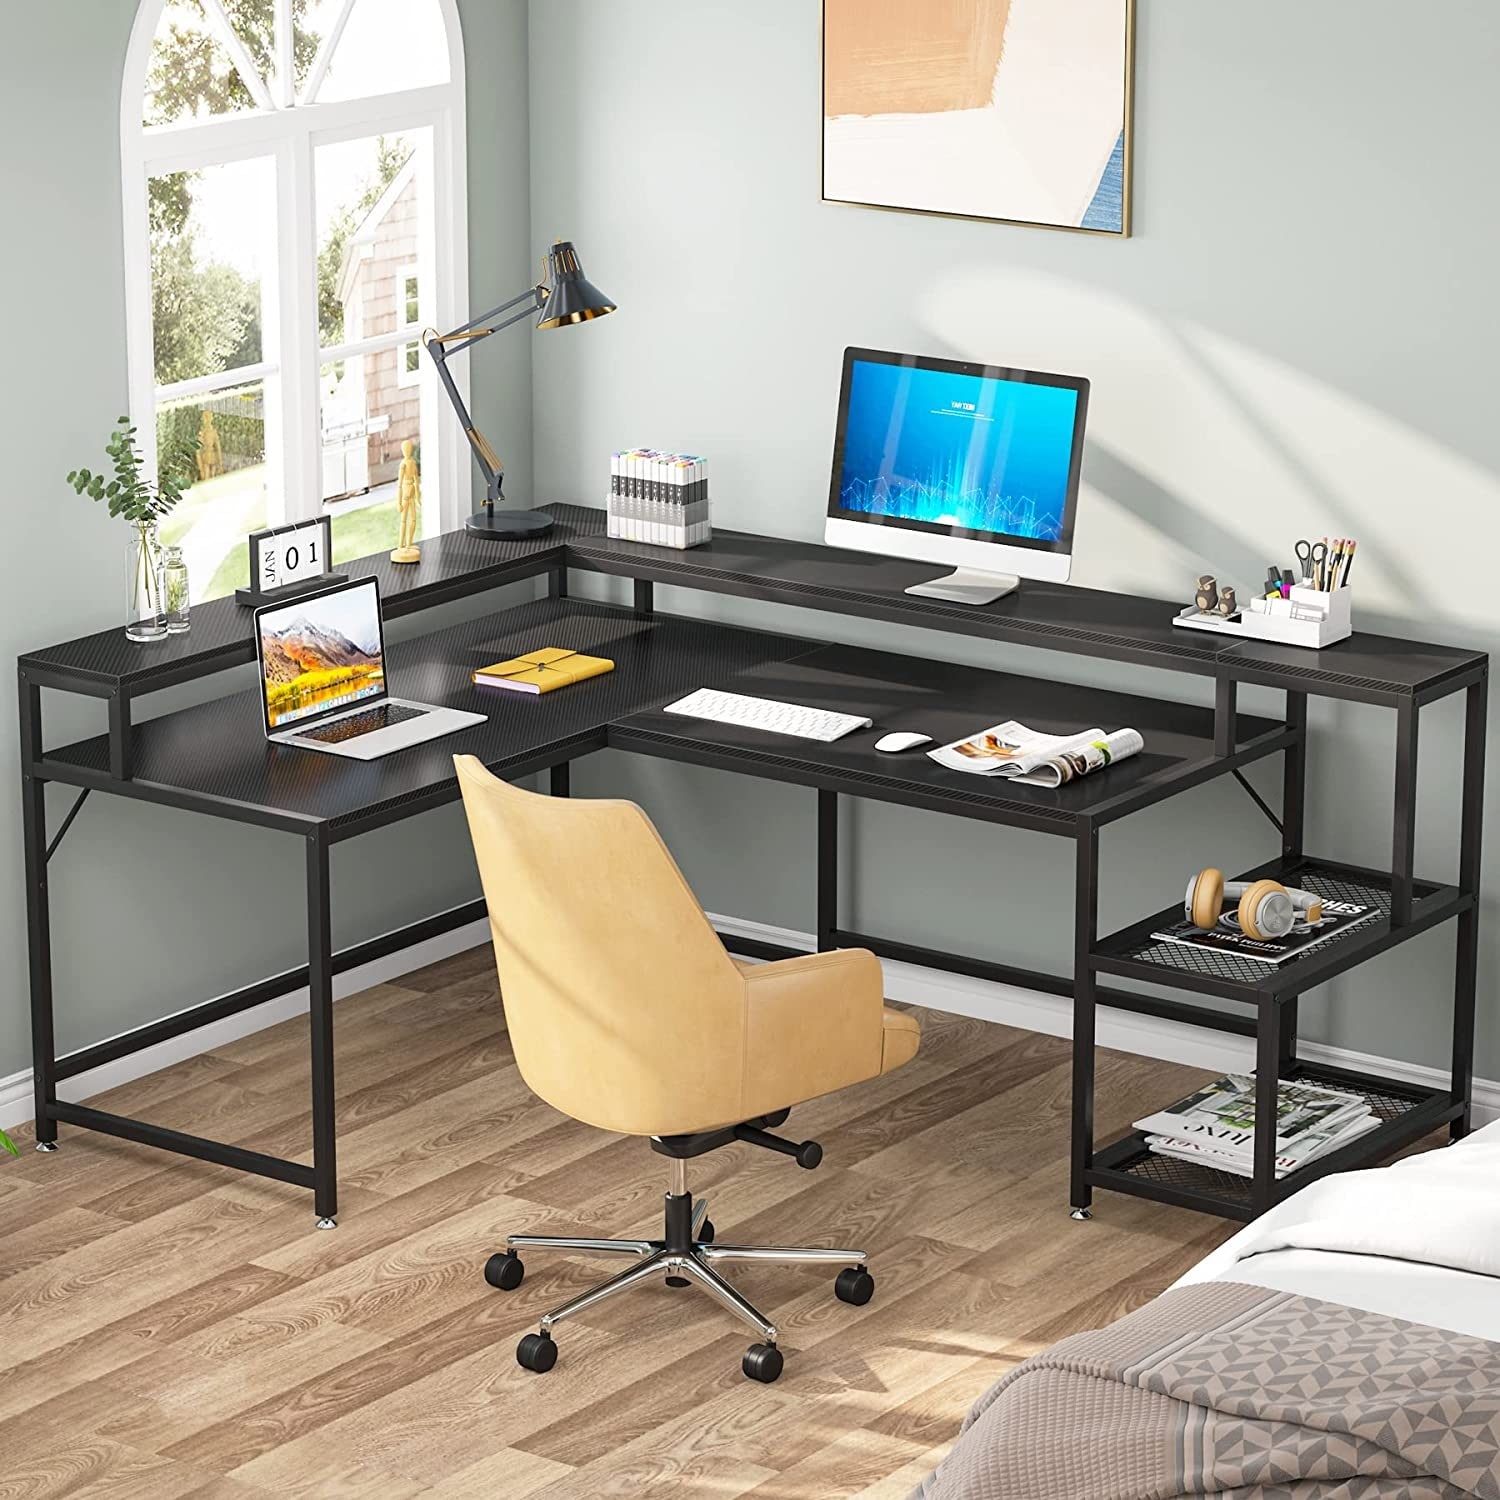 Madesa Gaming Computer Desk with 5 Shelves, Cable Management and Large Monitor Stand, Wood, 24 D x 53 W x 29 H - Black